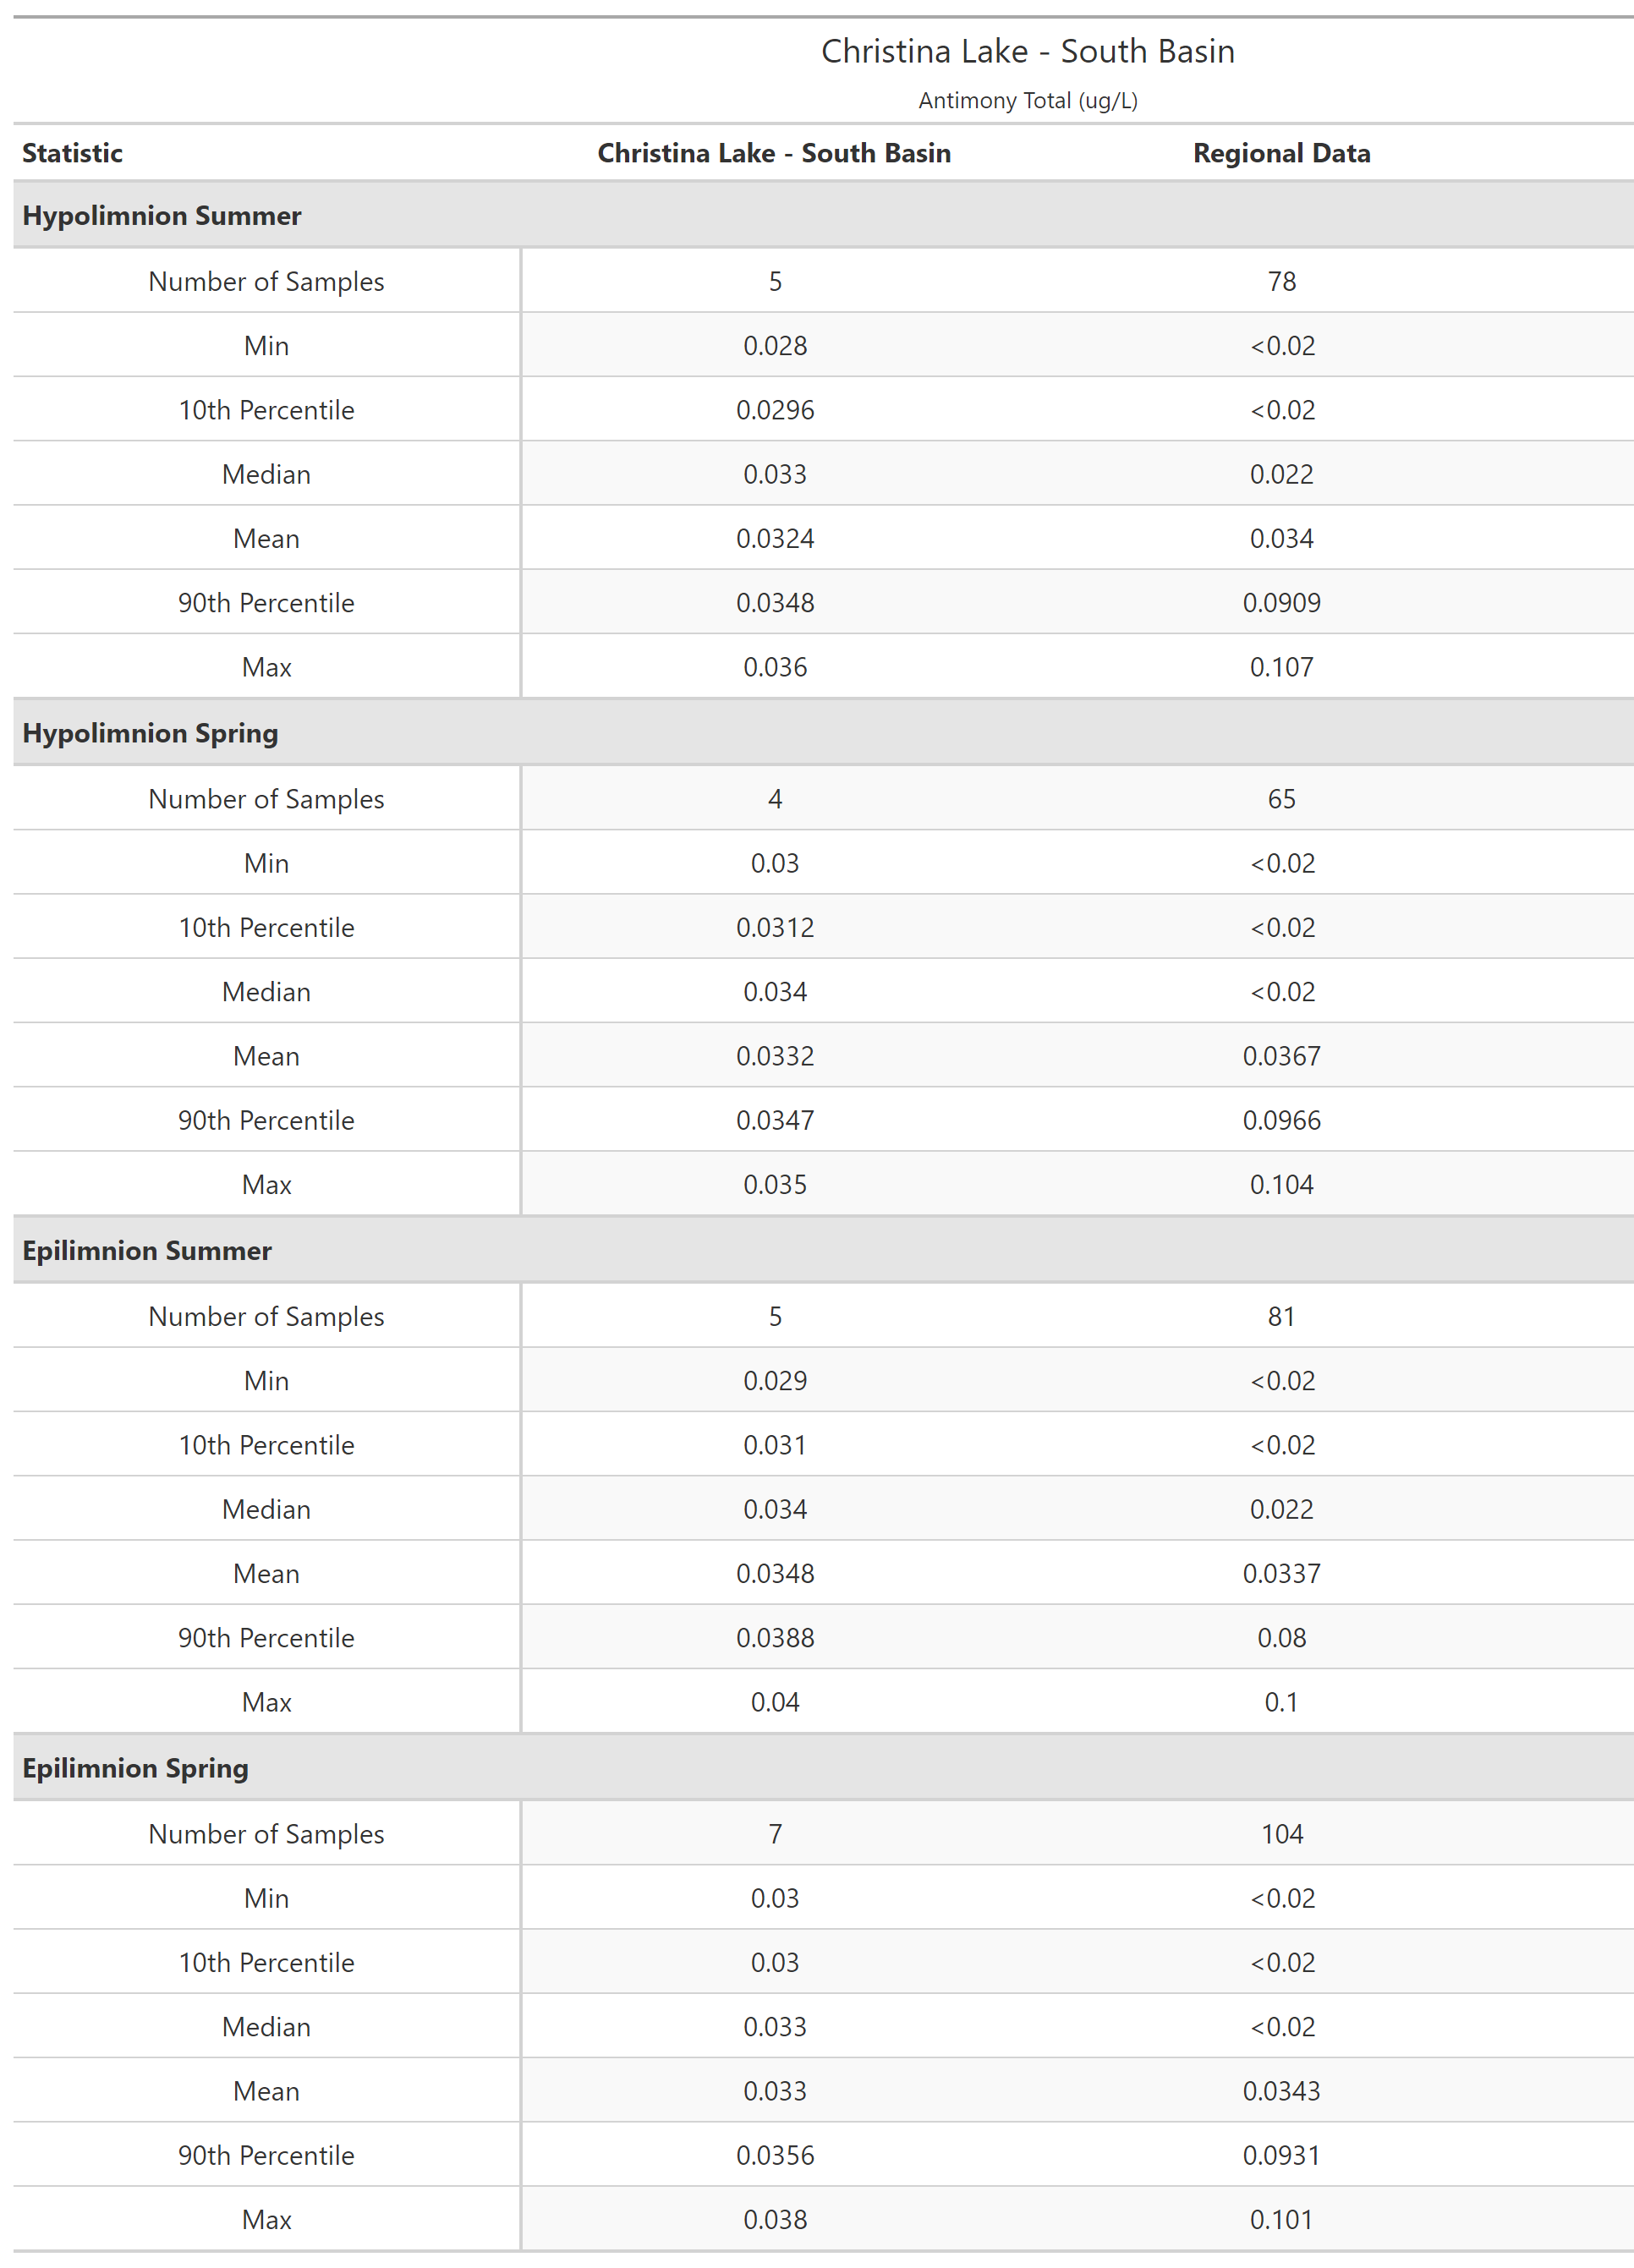 A table of summary statistics for Antimony Total with comparison to regional data